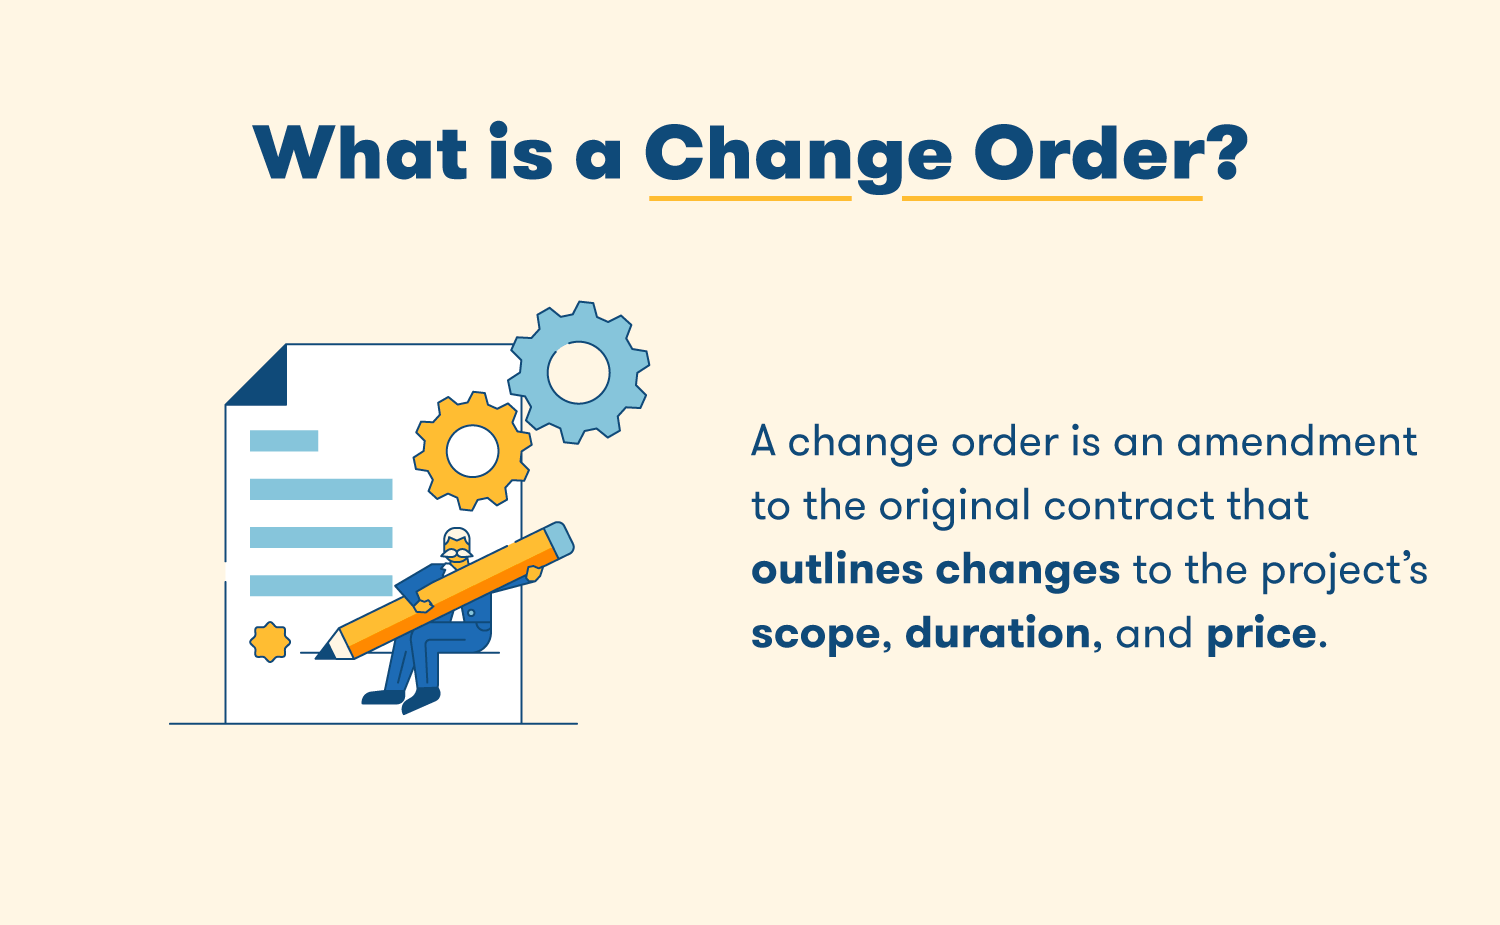 what is a change order?